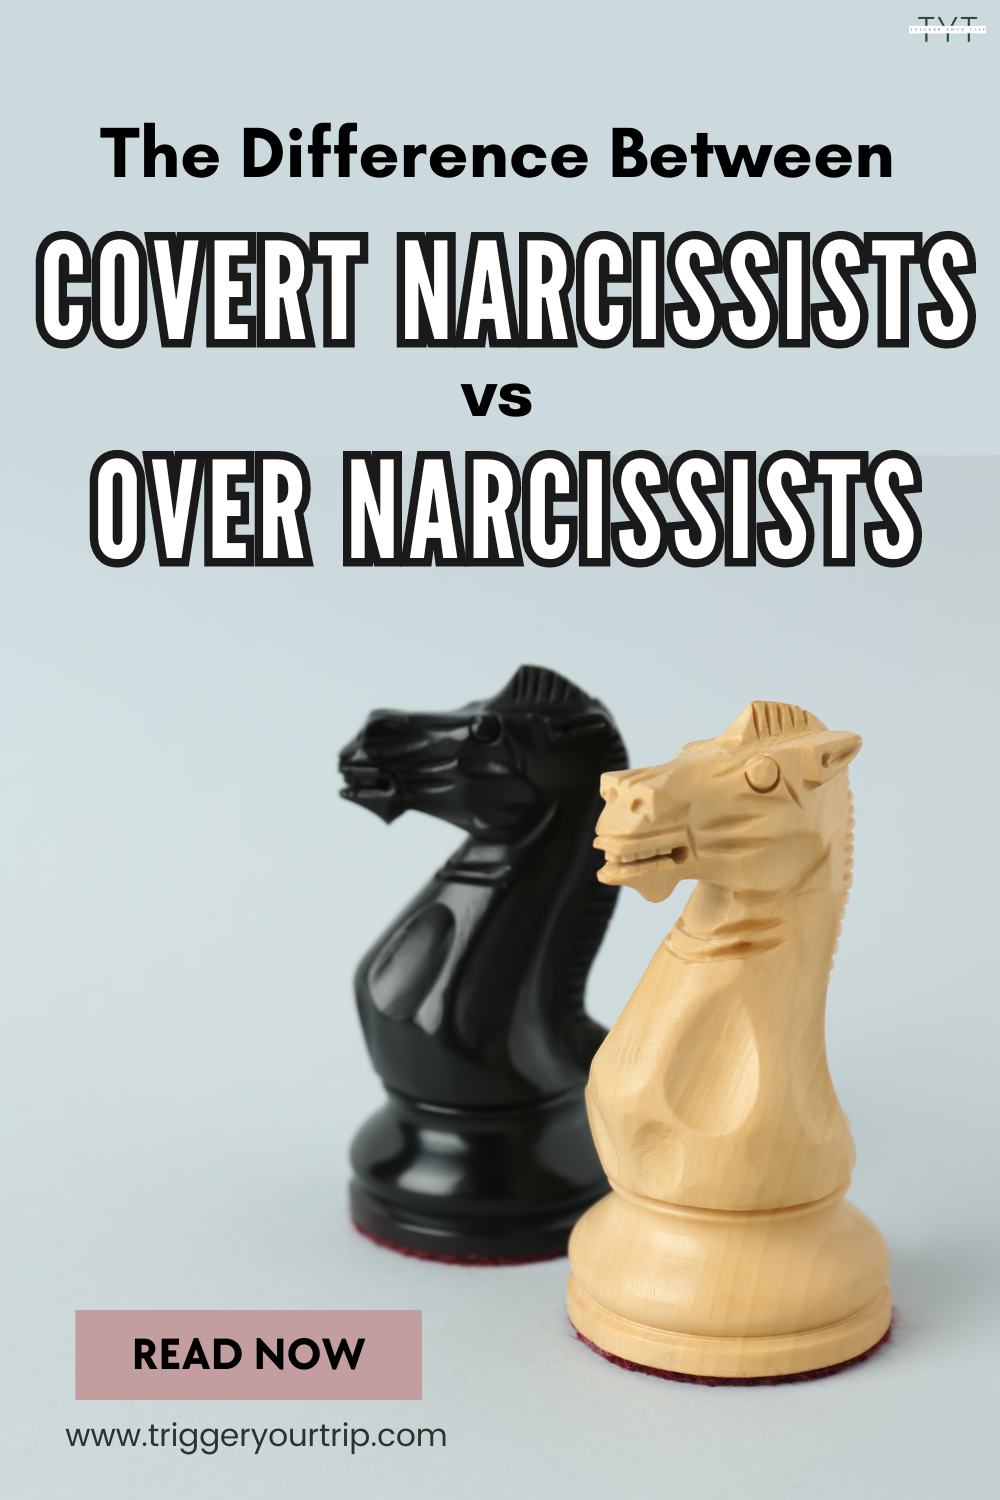 recently presented difference between covert narcissists and over narcissists (covert narcissist test)